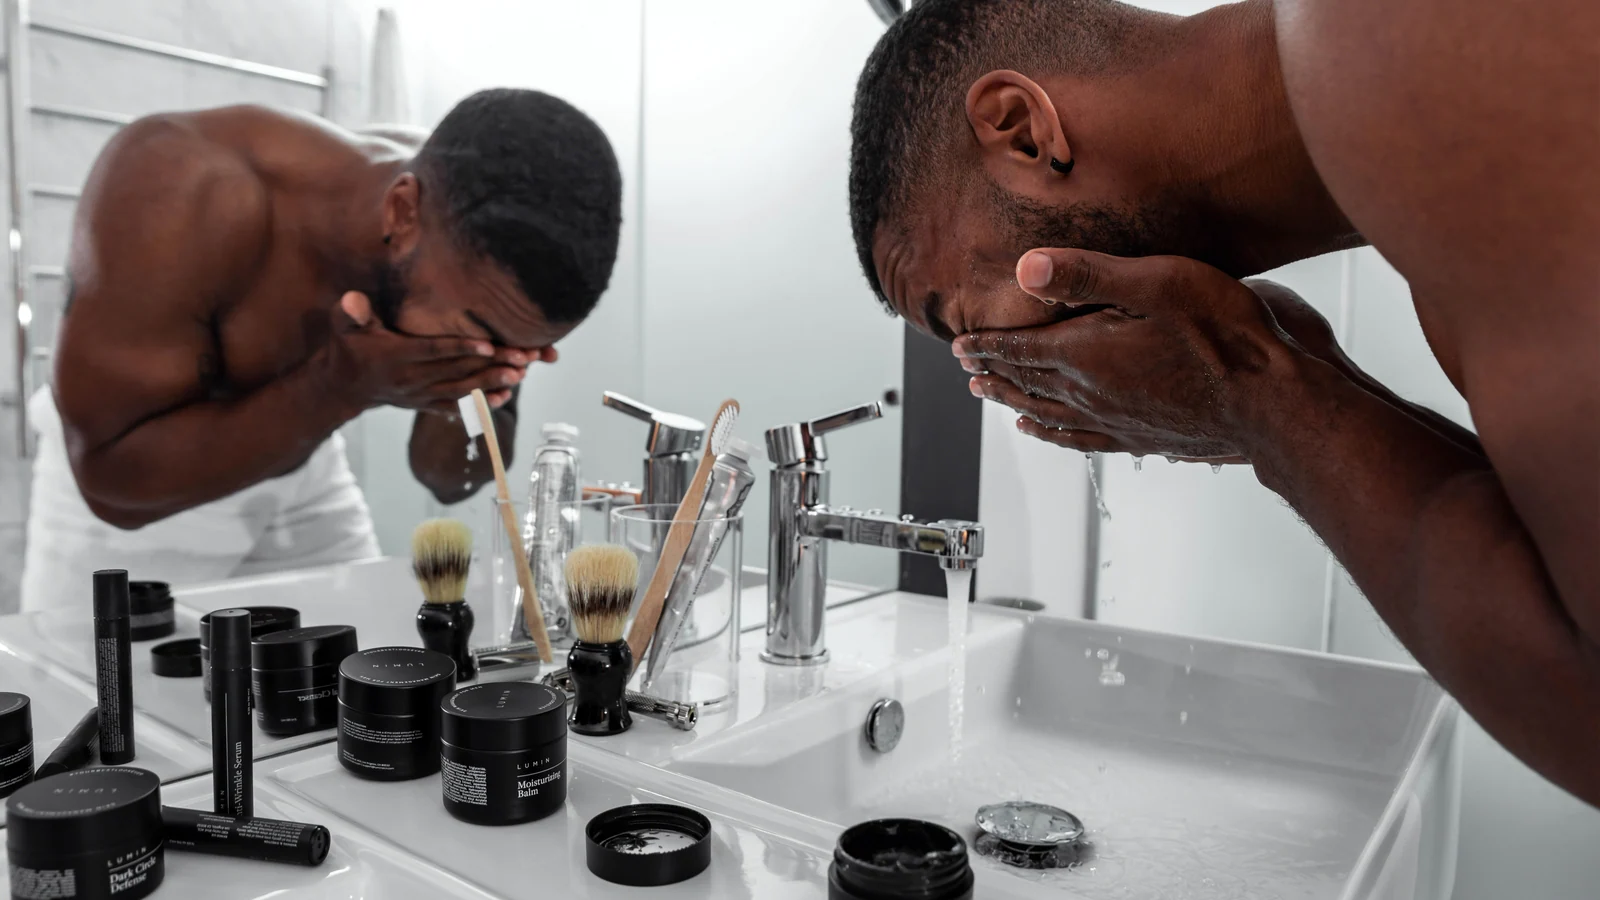 Skincare routine for men: Experts share basic tips to achieve a refreshed look